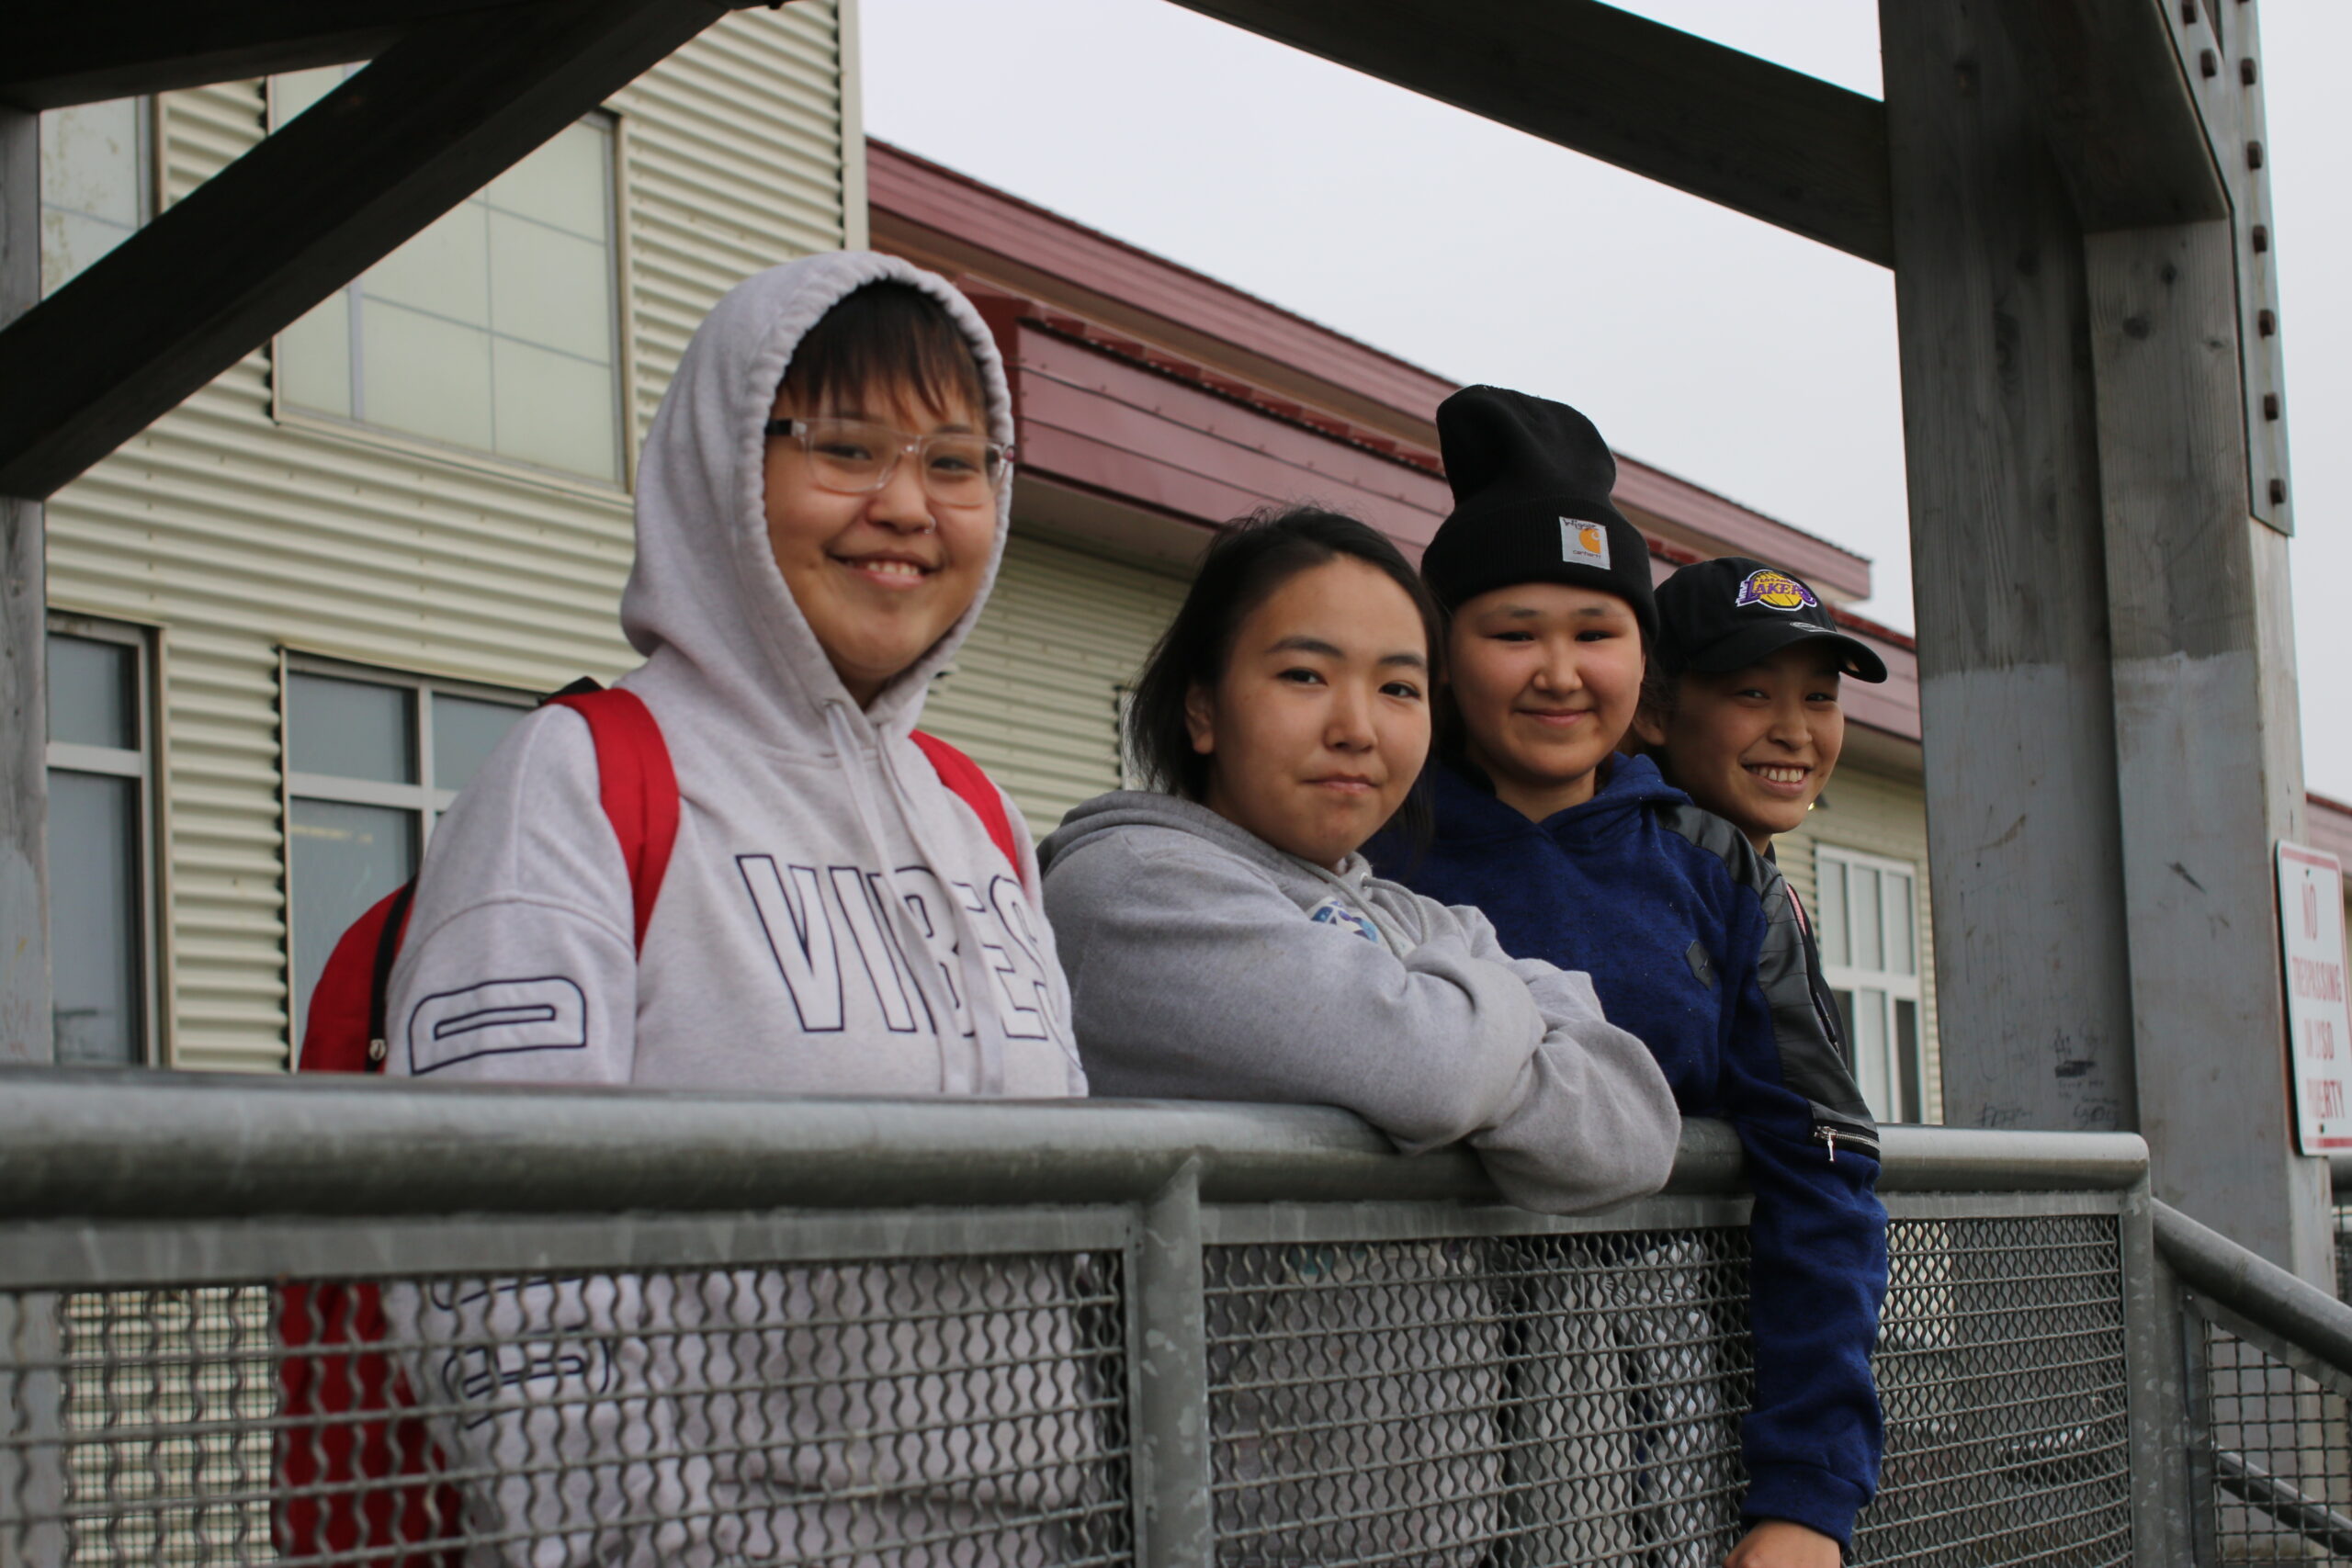 Students in Hooper Bay on first day of school.